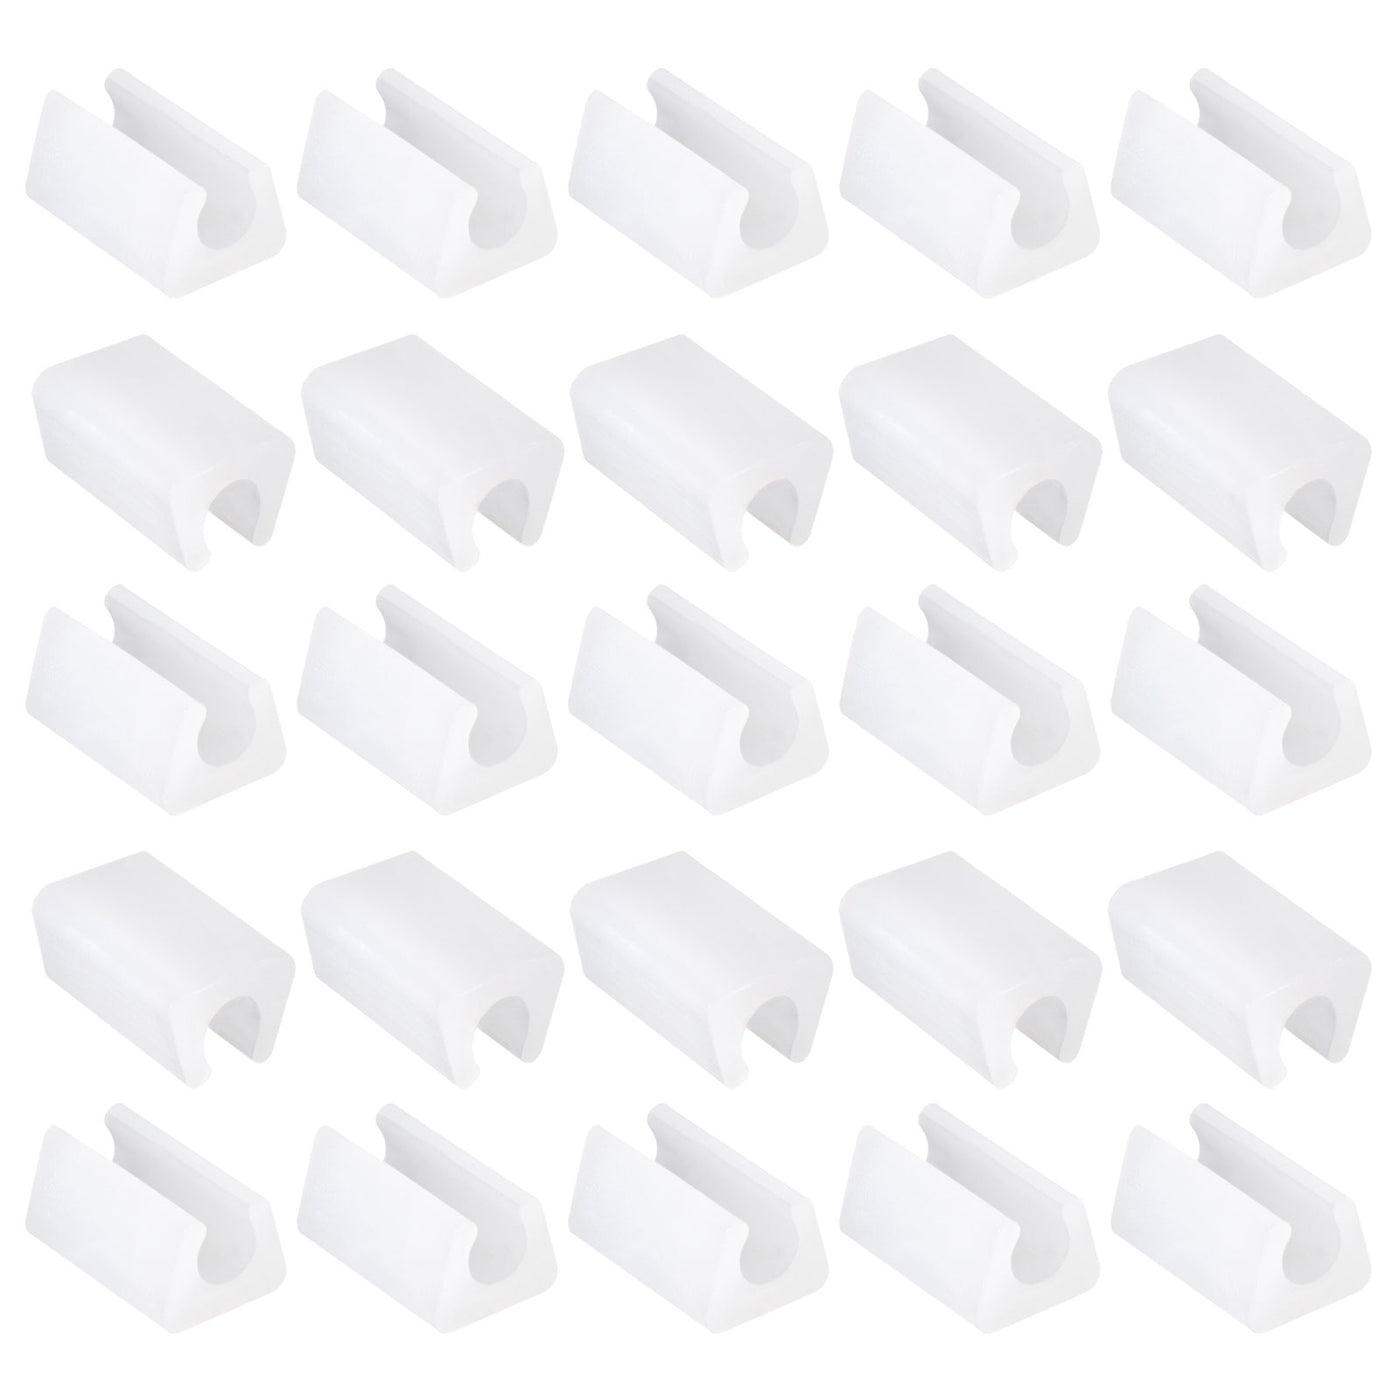 uxcell Uxcell 40Pcs Rectangle Shaped Non-Slip Chair Leg Tip 7-8mm Plastic Furniture Feet White